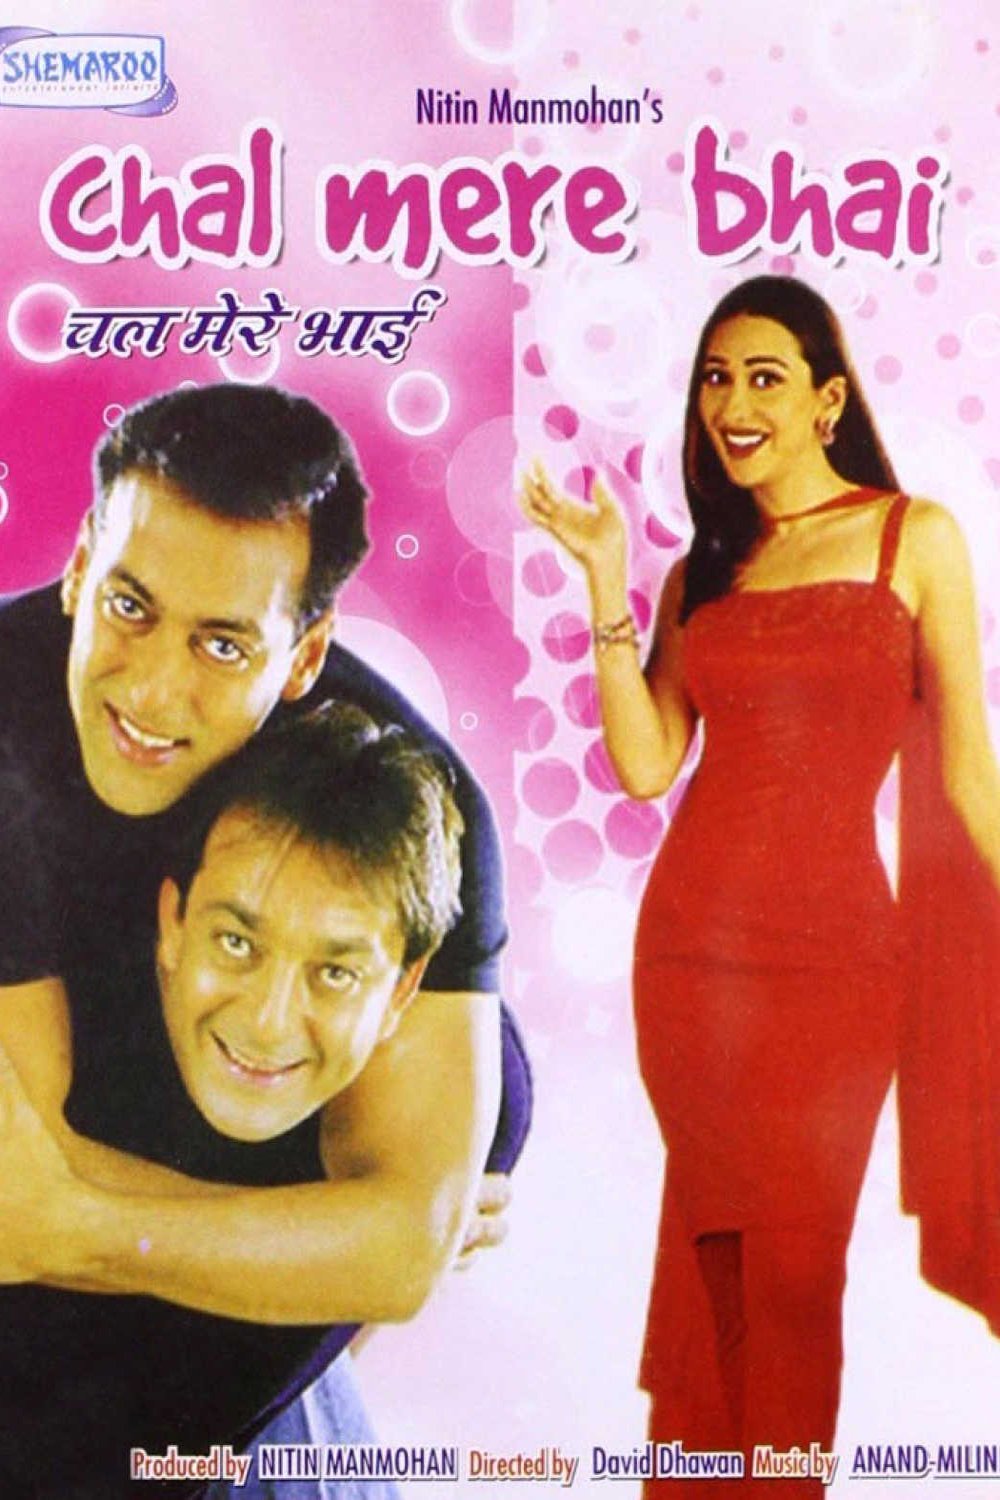 Hindi poster of the movie Chal Mere Bhai